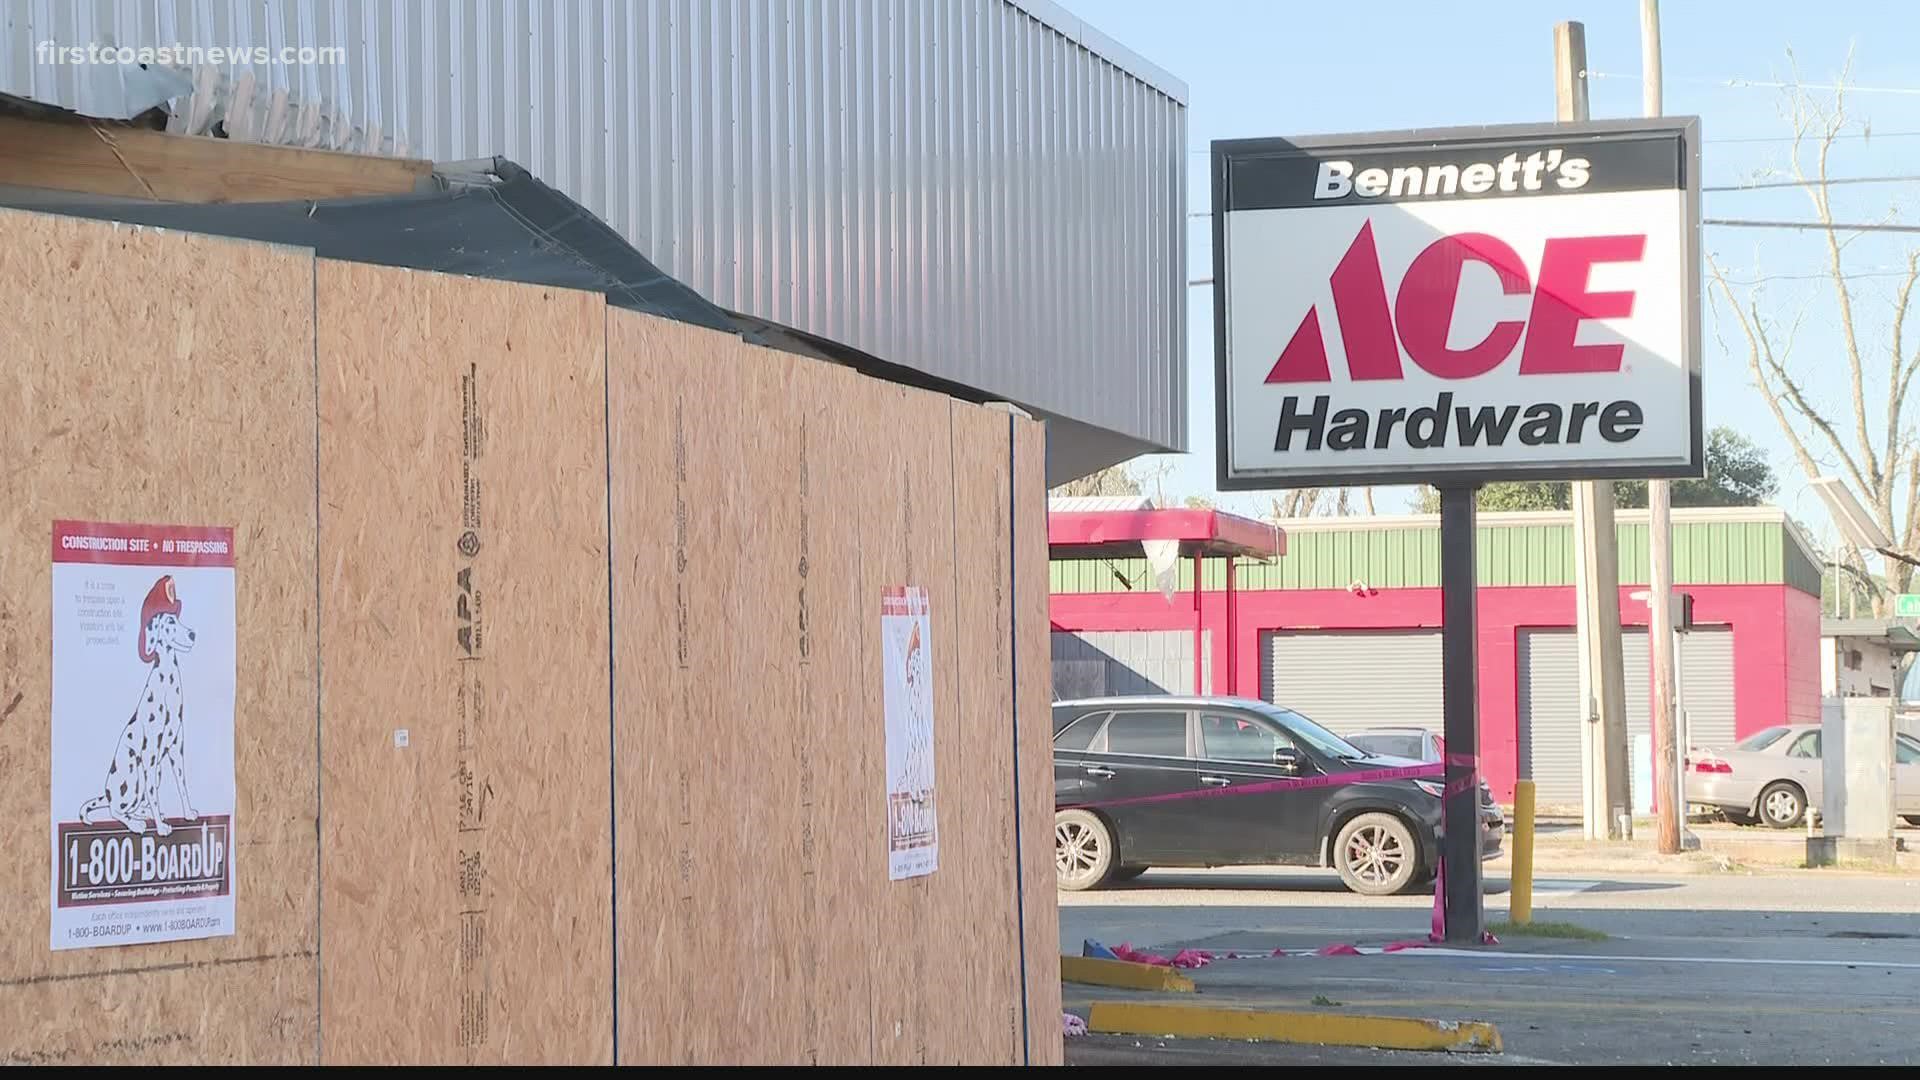 The teen, who had a learner's permit, caused the semi truck to crash into the Ace Hardware store on Jacksonville's Westside, according to the crash report.